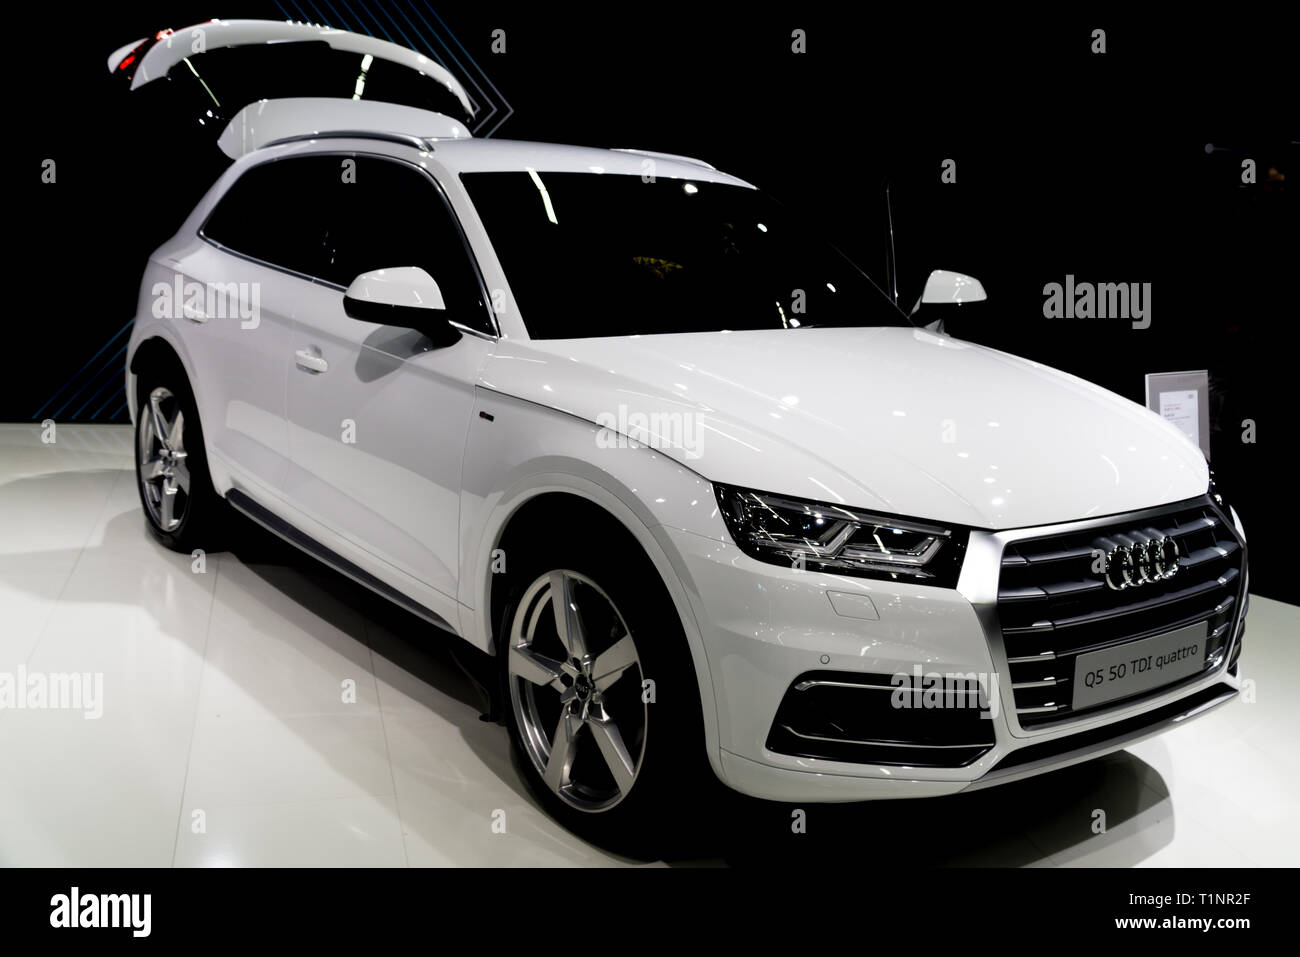 Salzburg, Austria - March 23rd, 2019: New Audi Q5 on display at the local car show Stock Photo